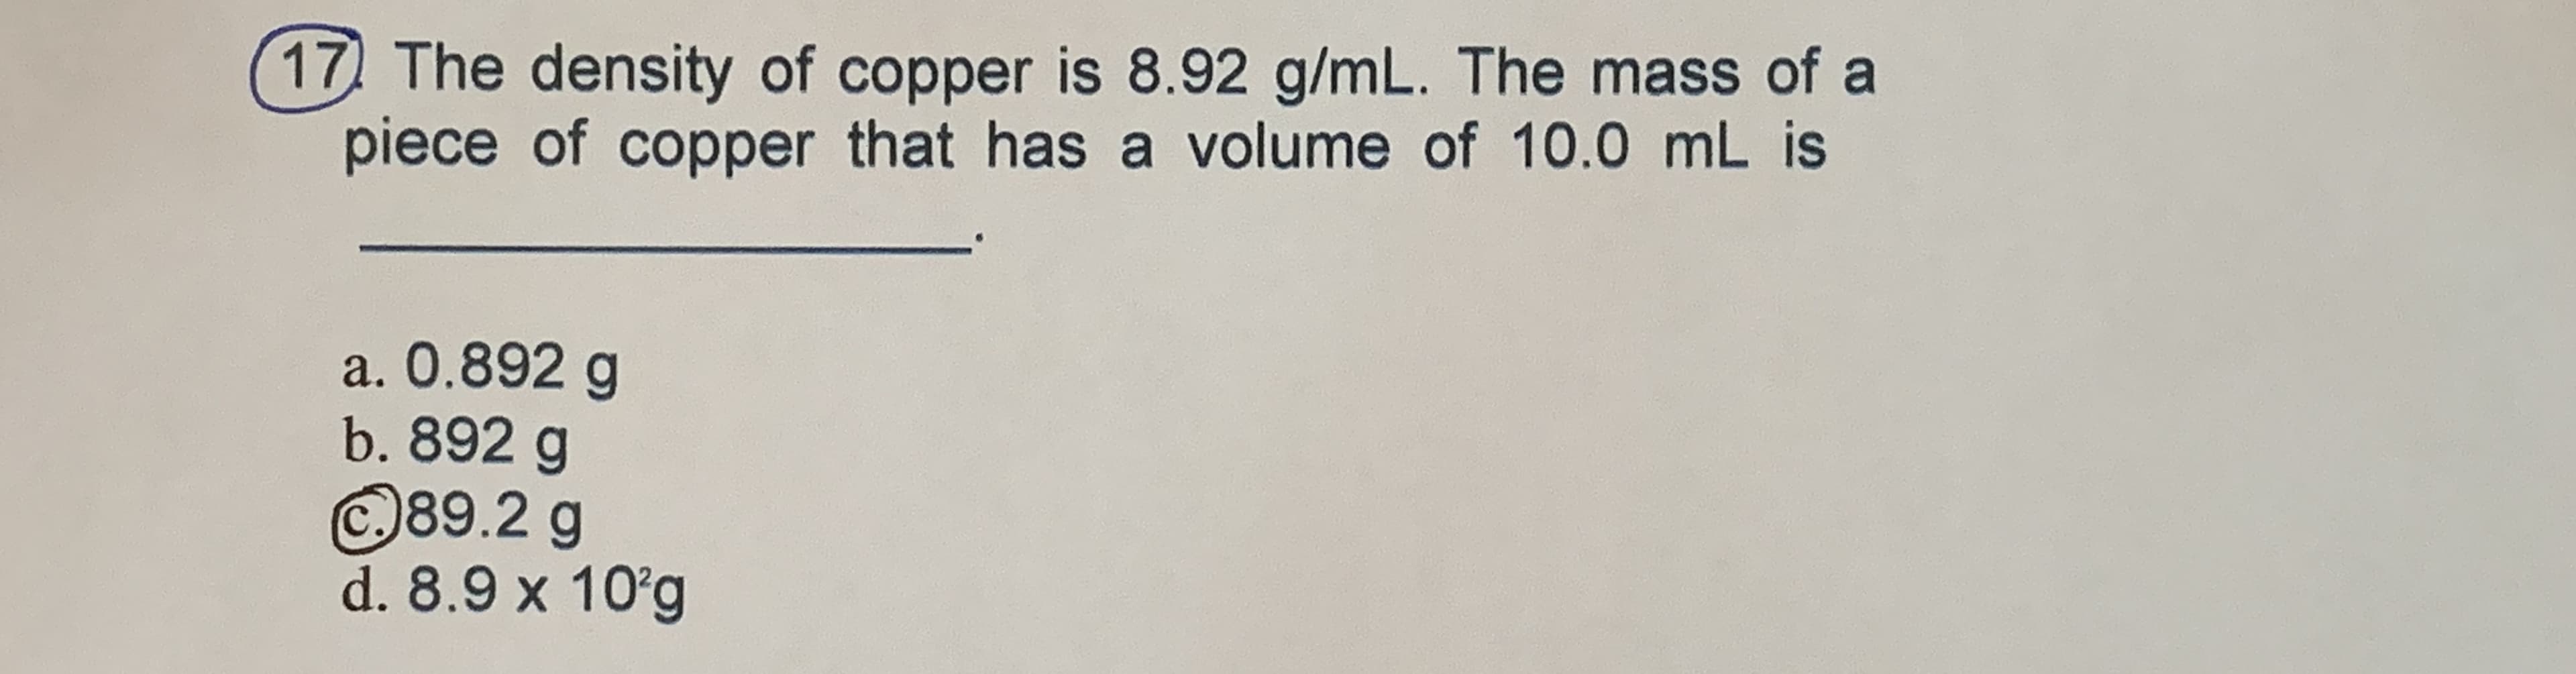 17 The density of copper is 8.92 g/mL. The mass of a
piece of copper that has a volume of 10.0 mL is
a. 0.892 g
b. 892 g
©89.2 g
d. 8.9 x 10g
